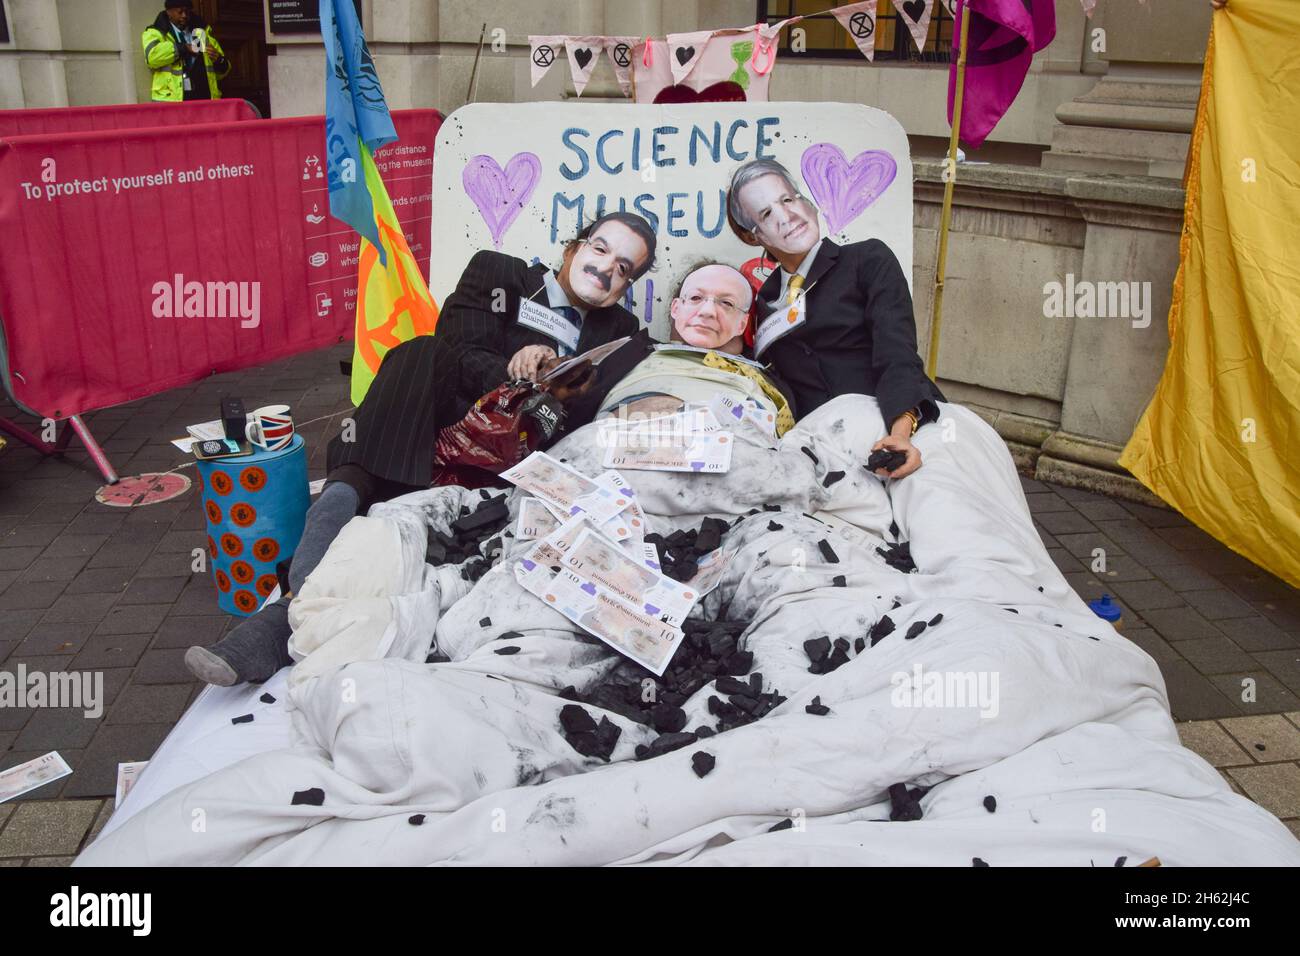 London, UK. 12th Nov, 2021. Protesters dressed as Adani chairman Gautam Adani, Science Museum director Ian Blatchford and Shell CEO Ben van Beurden lay in a bed covered with fake money and coal during the demonstration.Extinction Rebellion demonstrators gathered outside the Science Museum in South Kensington, as part of their ongoing protests against sponsorship of the museum by fossil fuel companies Shell and Adani. (Photo by Vuk Valcic/SOPA Images/Sipa USA) Credit: Sipa USA/Alamy Live News Stock Photo